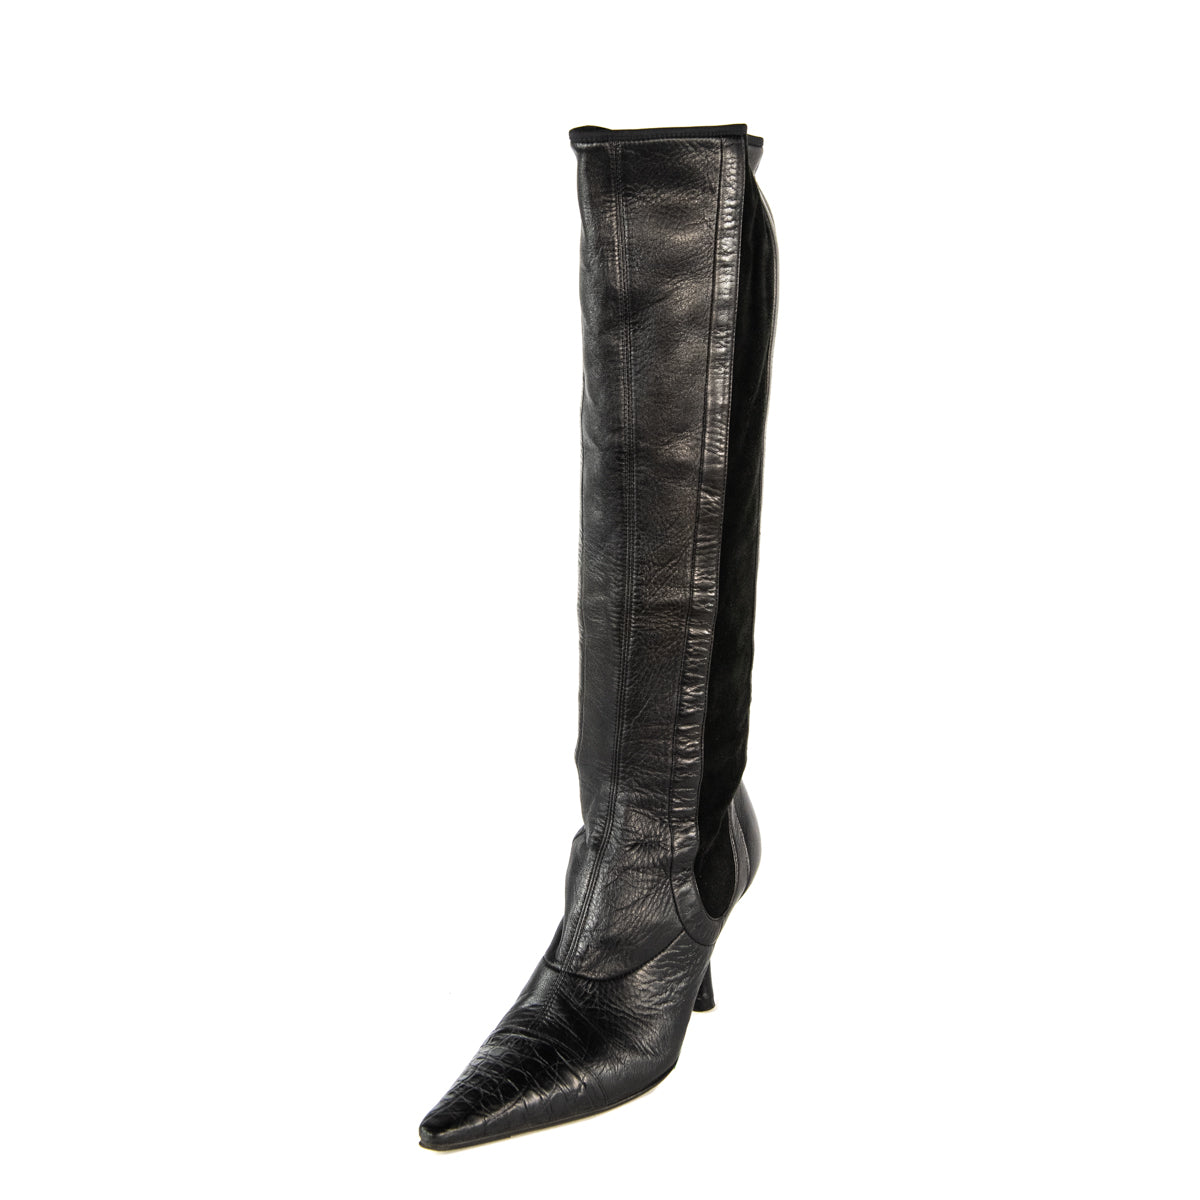 Chanel Black Leather Cap Toe Knee High Boots - Consign Chanel